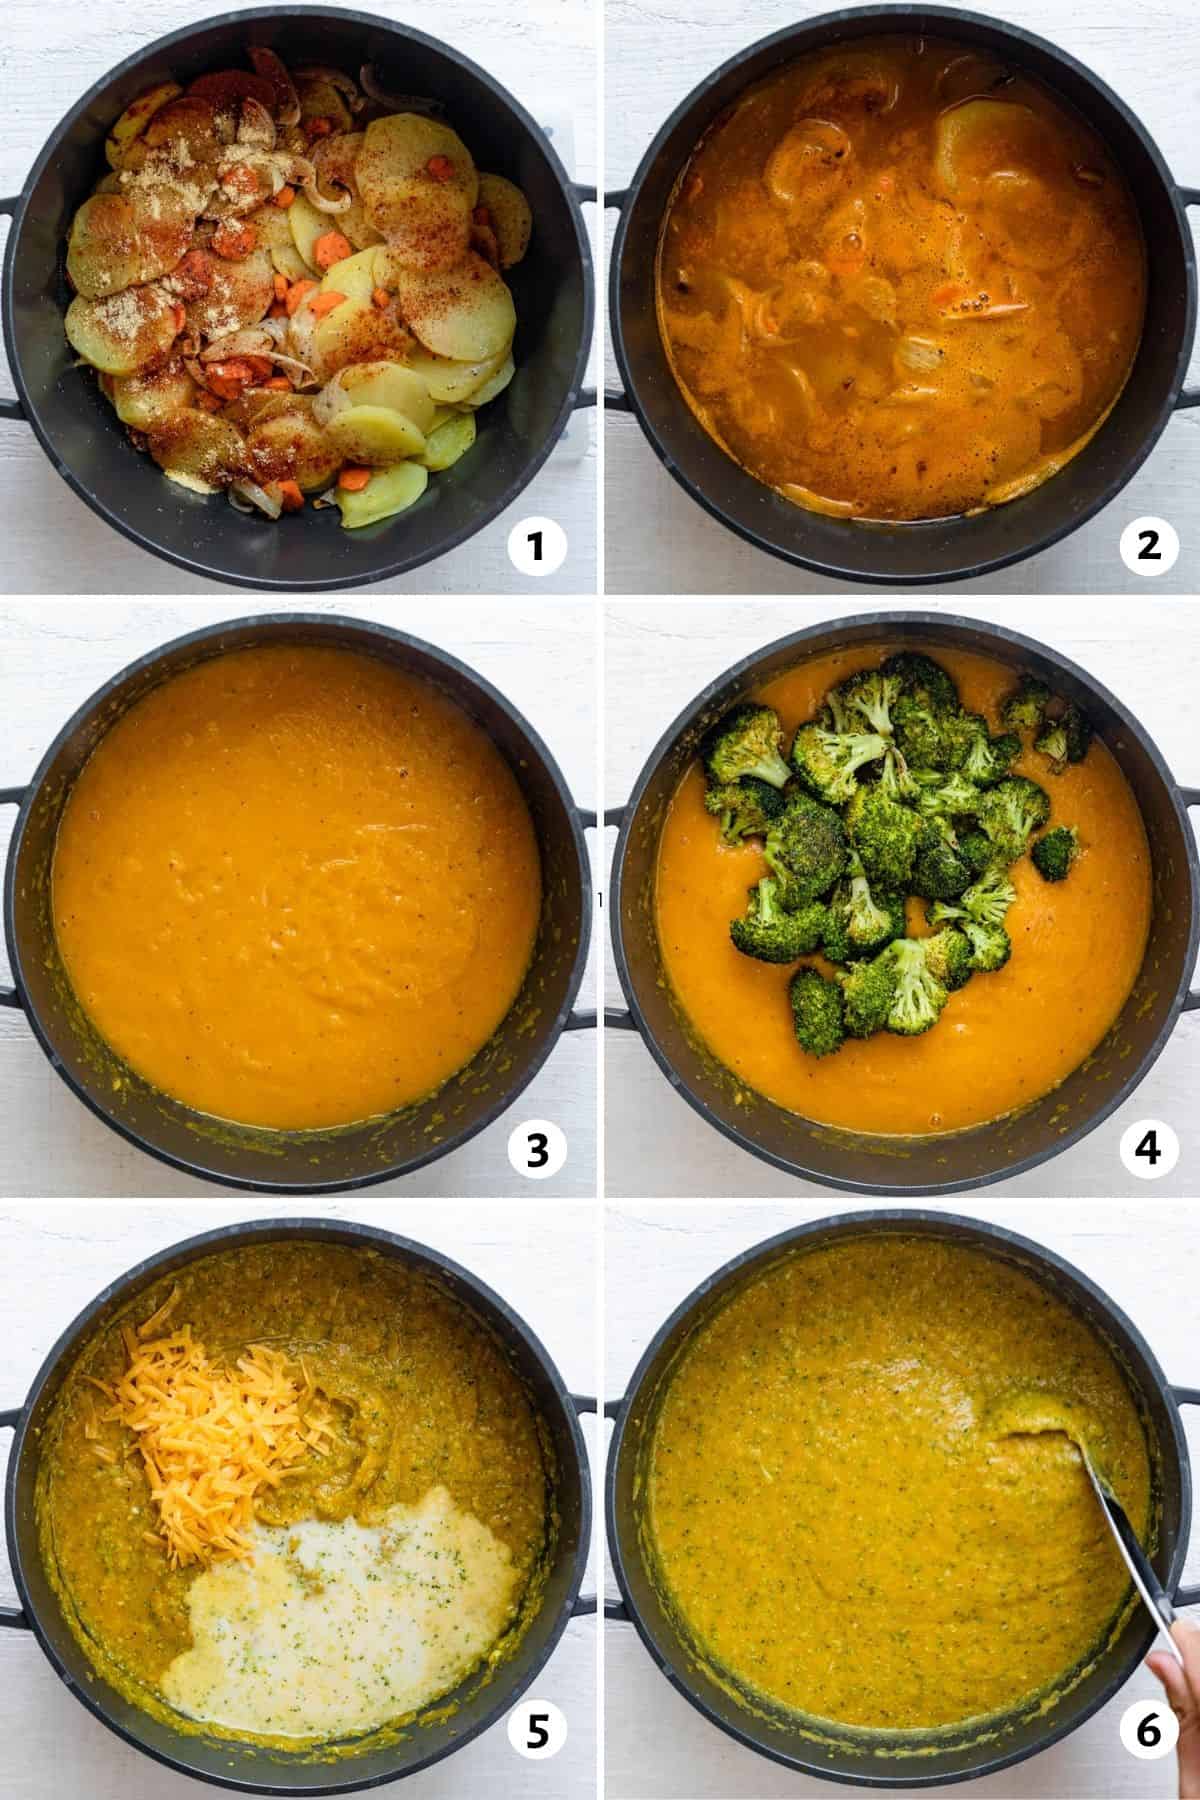 6 images showing the steps for making the soup all in one pot